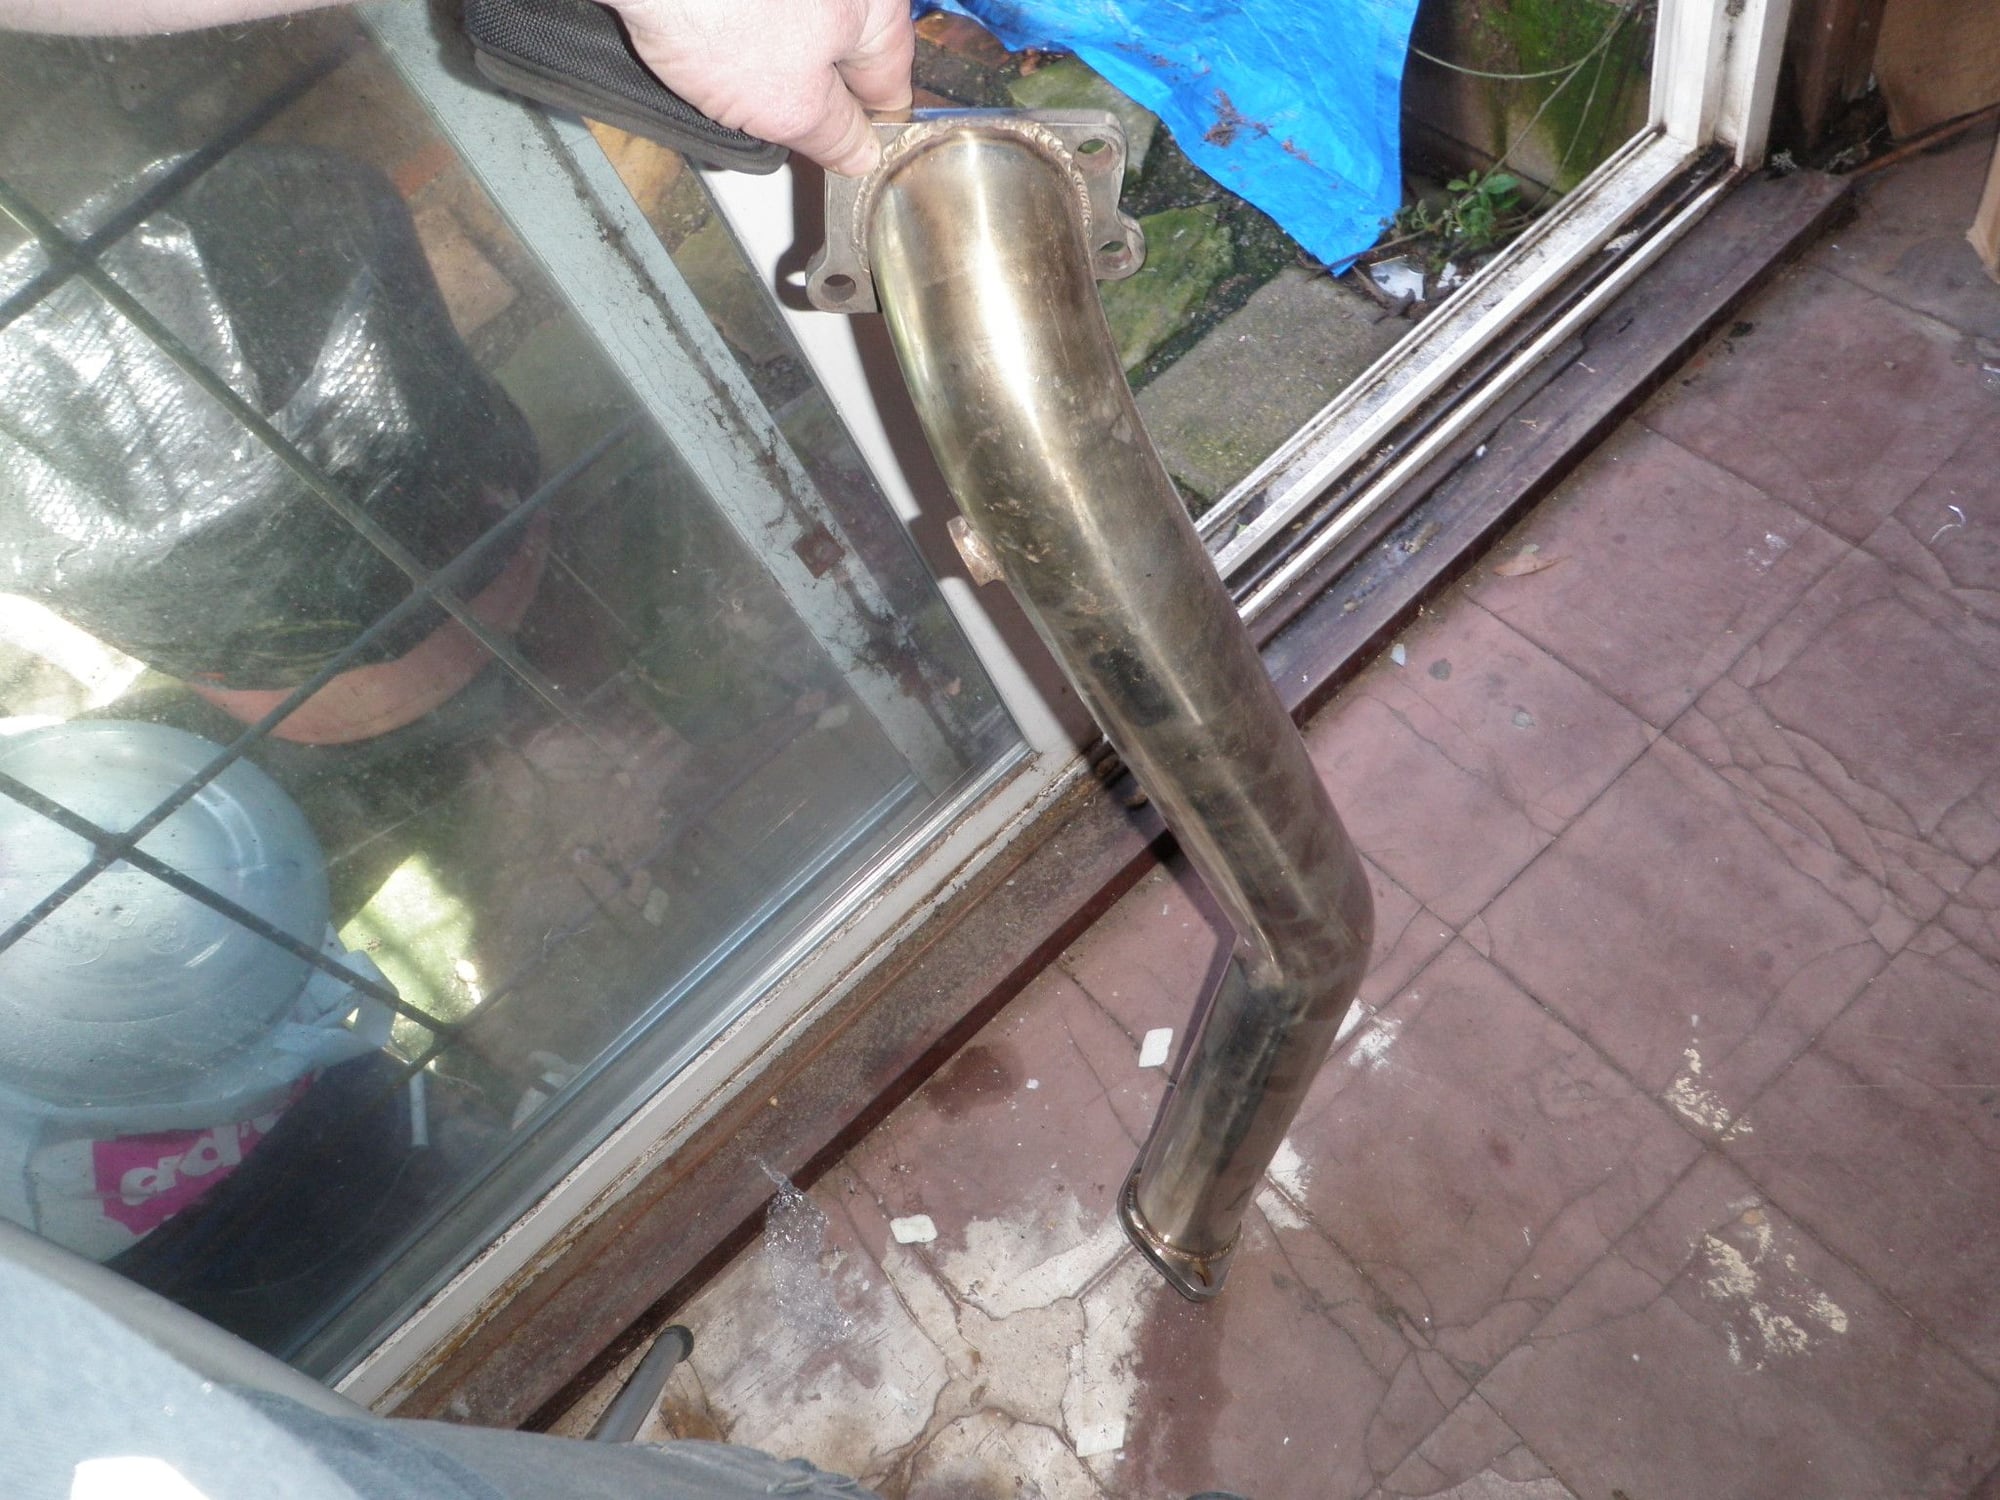 1994 Mazda RX-7 - FD ss downpipe - Engine - Exhaust - $40 - Union City, CA 94587, United States